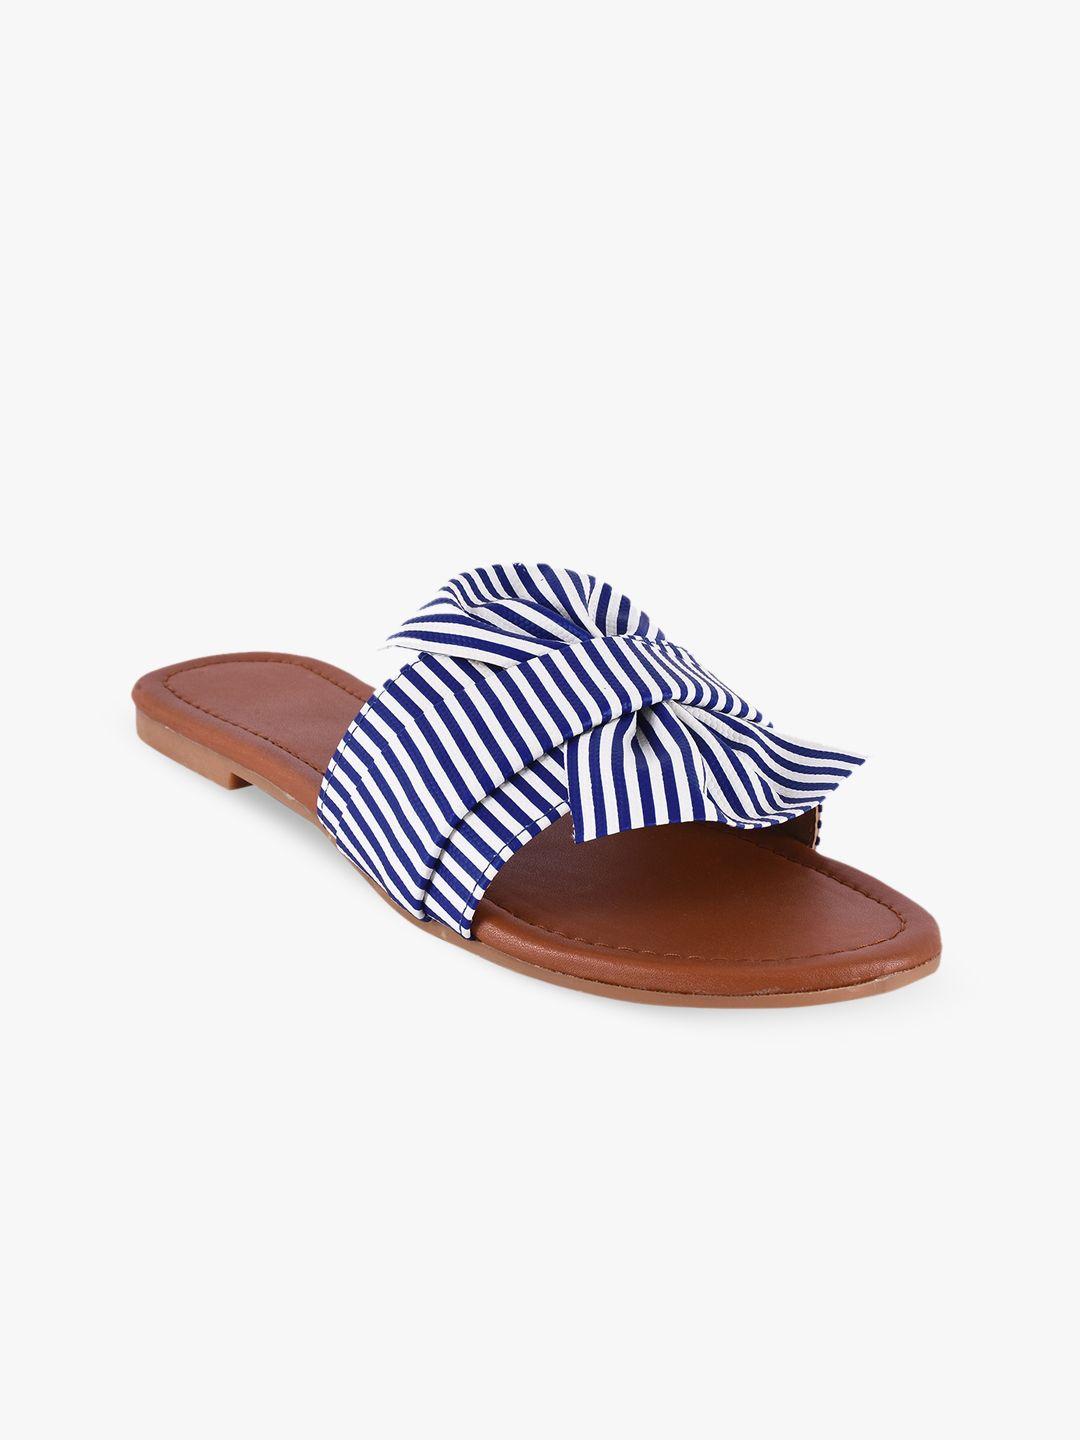 buckleup women blue striped open toe flats with bows